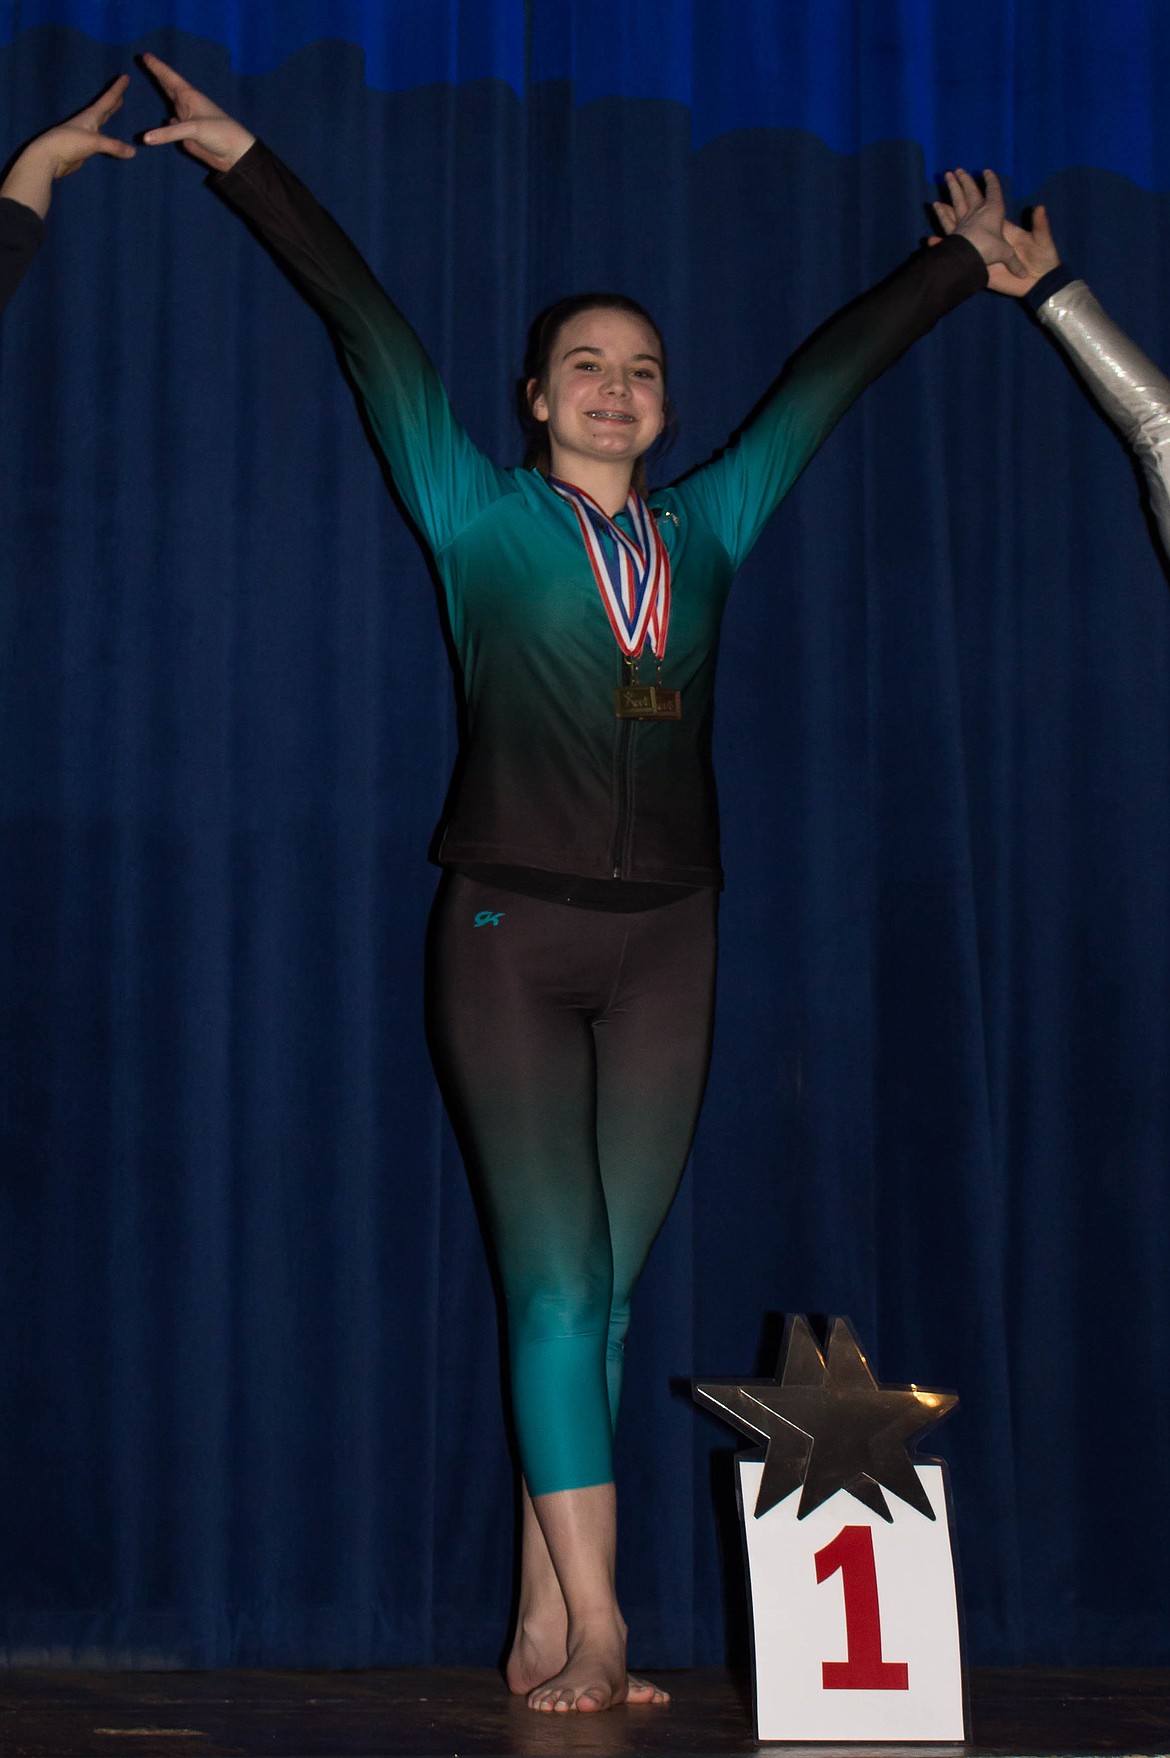 Courtesy photo
Karsyn Crawford of Technique Gymnastics won the Xcel Gold floor title at the recent Xcel state championships in Meridian.